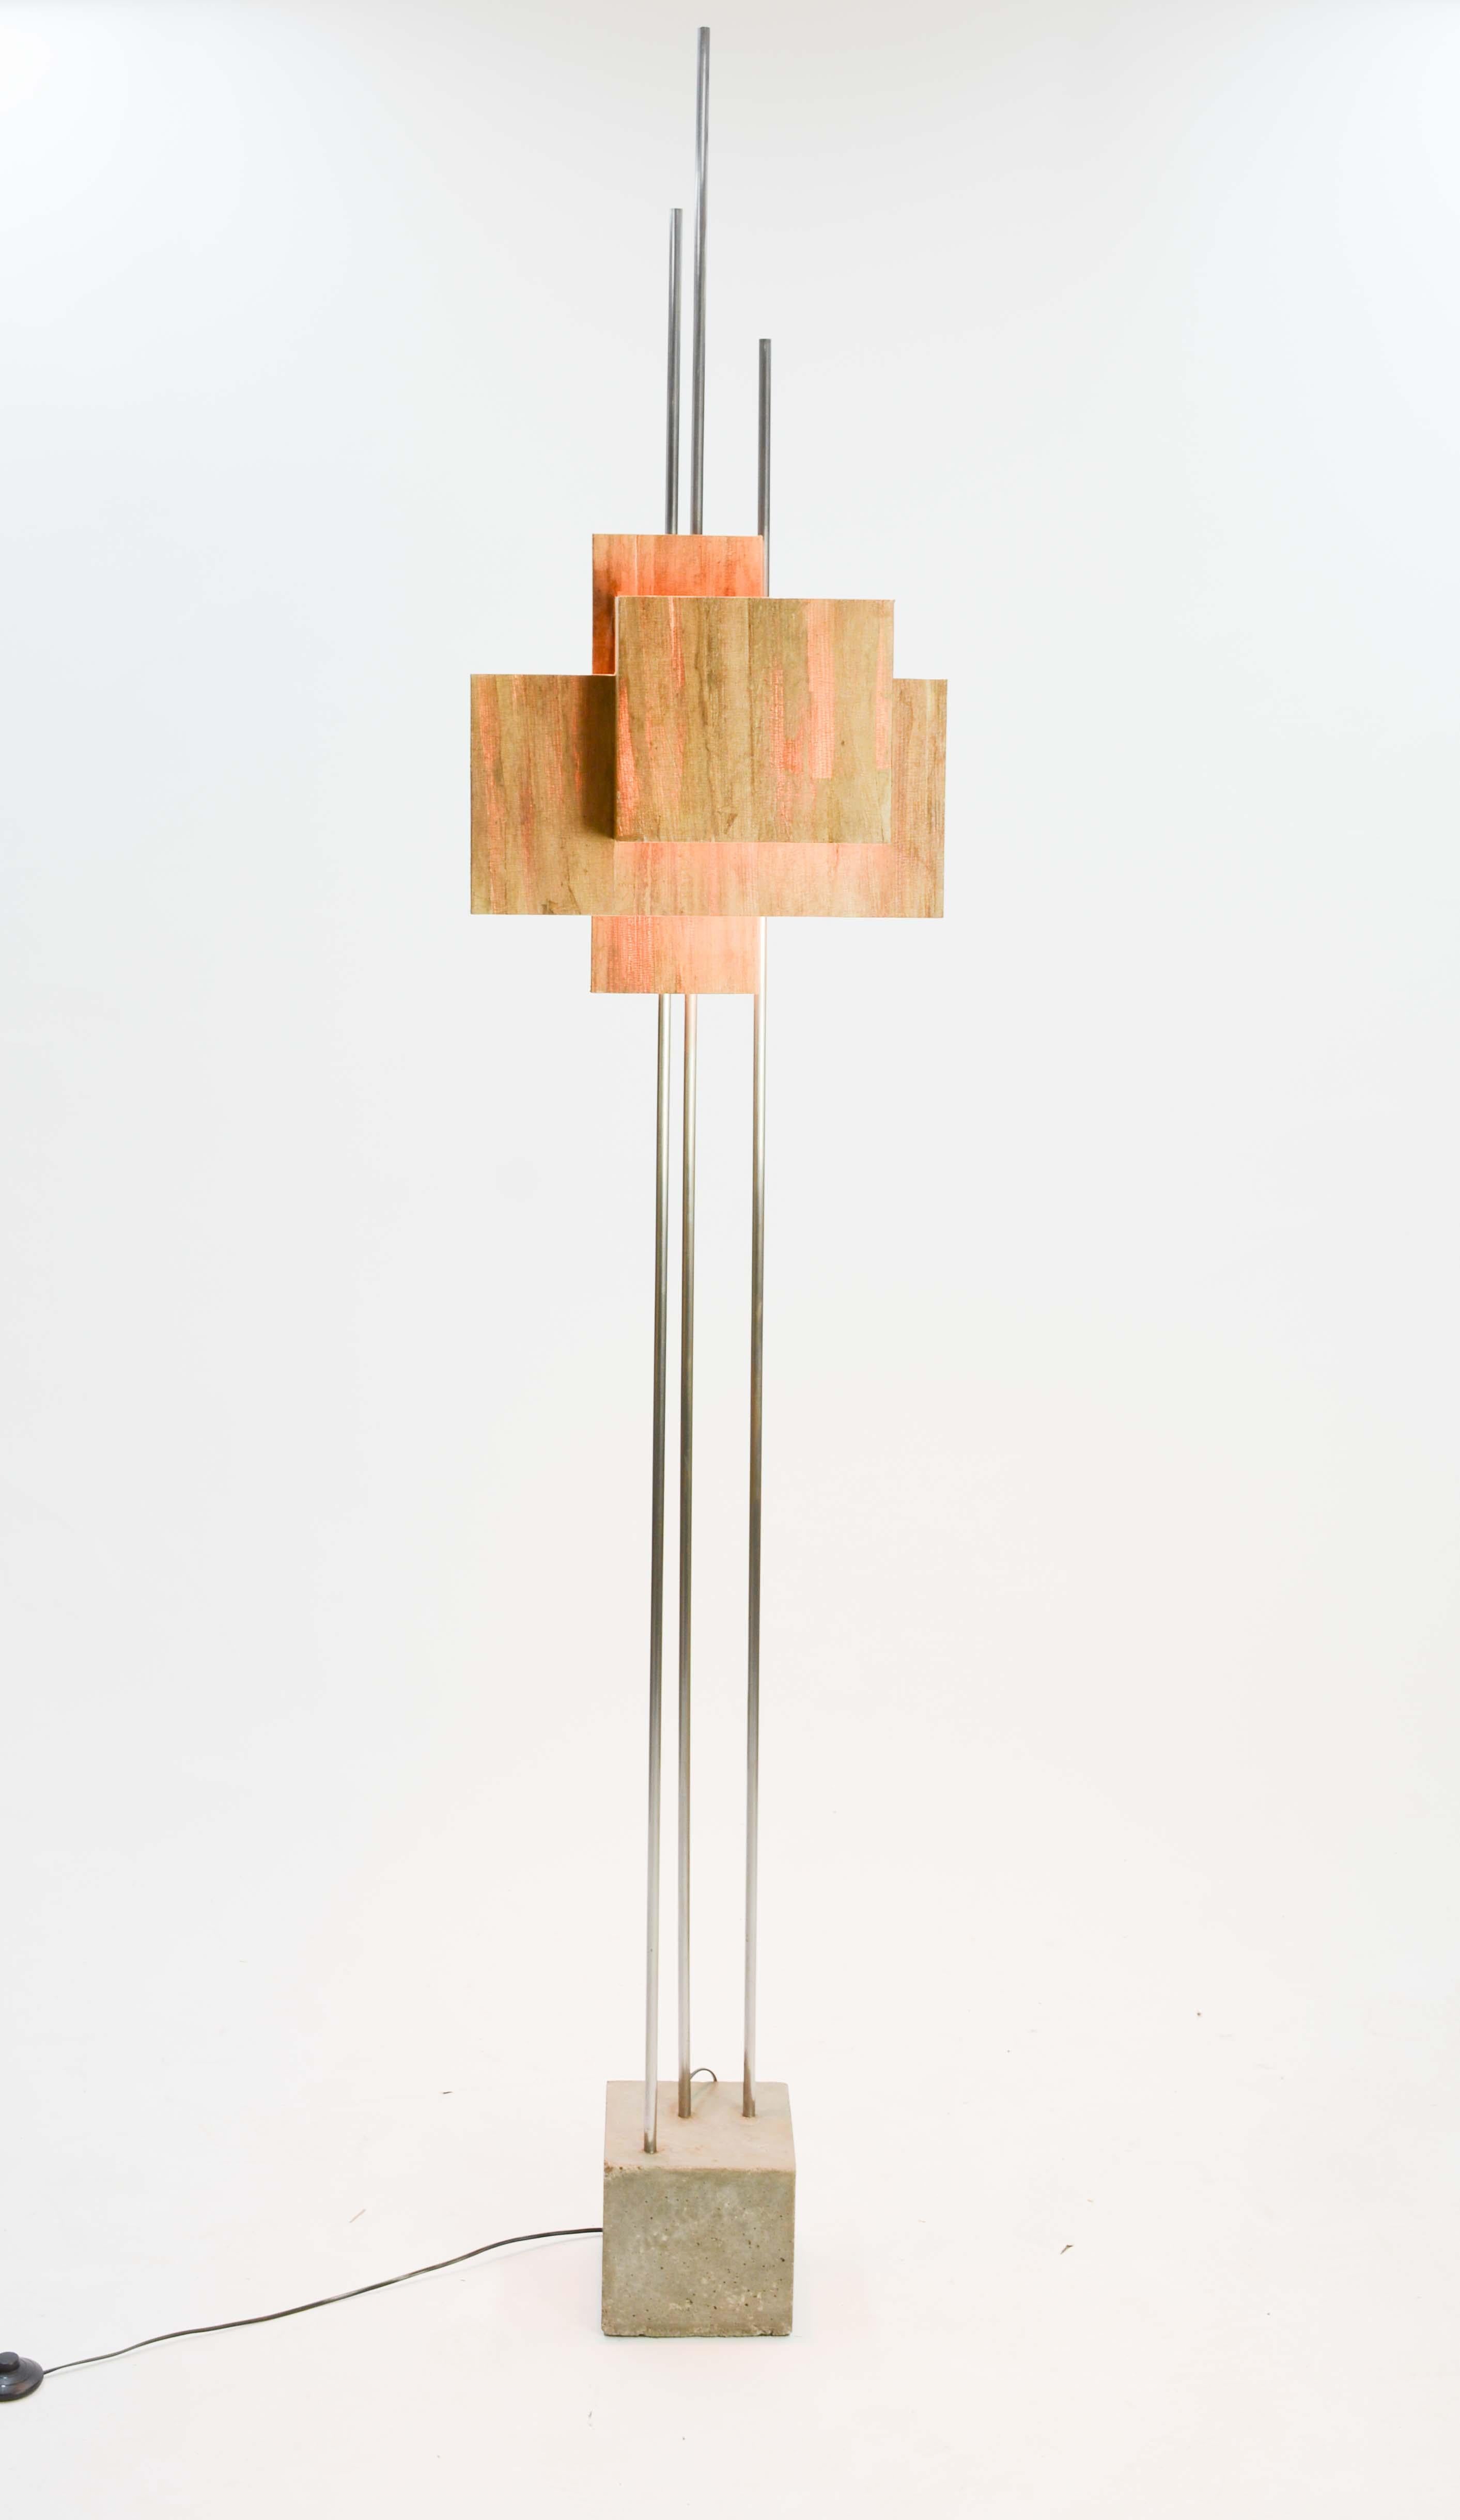 This Architecturally inspired floor lamp echoes the light work of FLW and the concrete of Prouve. It is a wonderful and playful combination of the weighted concrete and the light of the banana paper shade. The trio of aluminum uprights tie the two